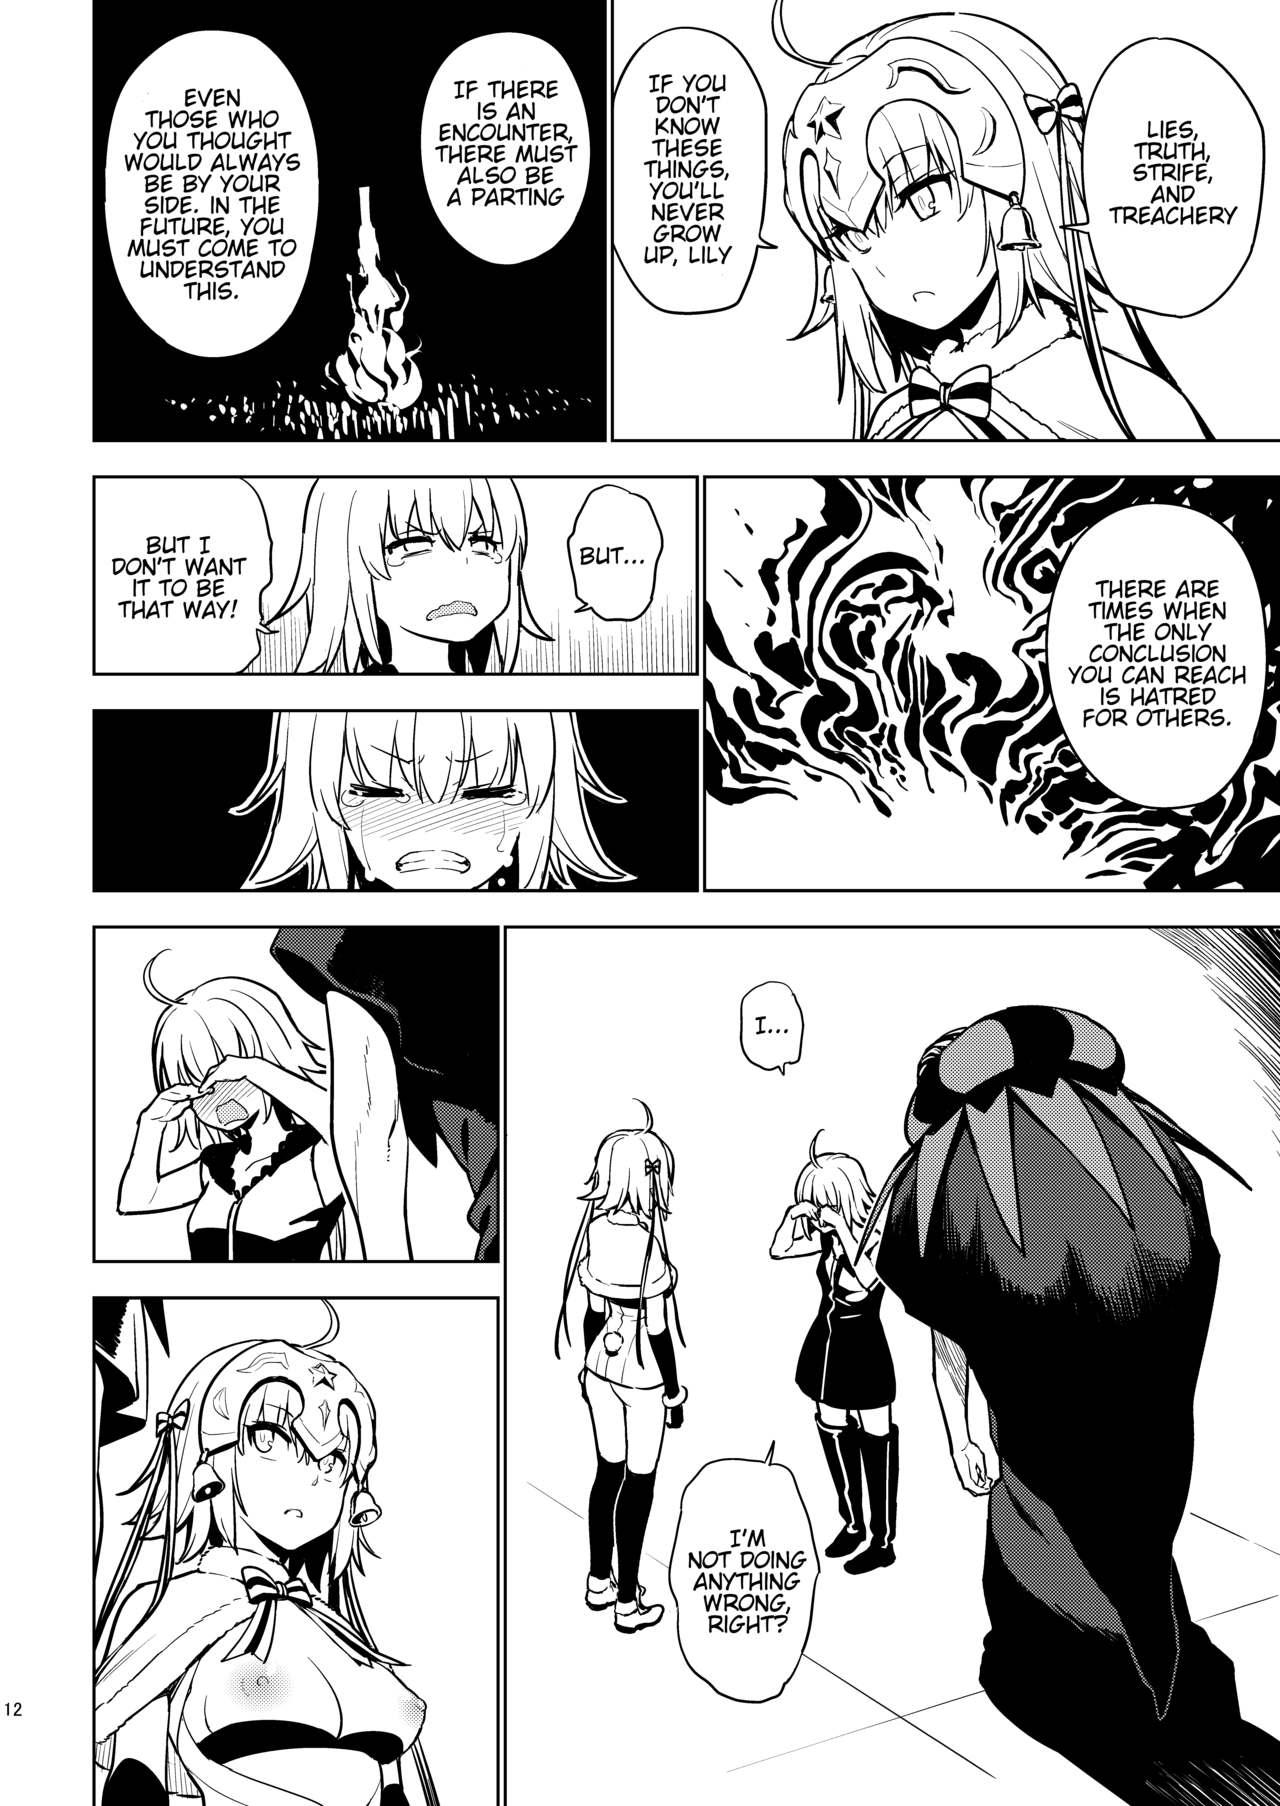 Sharing SO BORED - Fate grand order Gay Fetish - Page 10